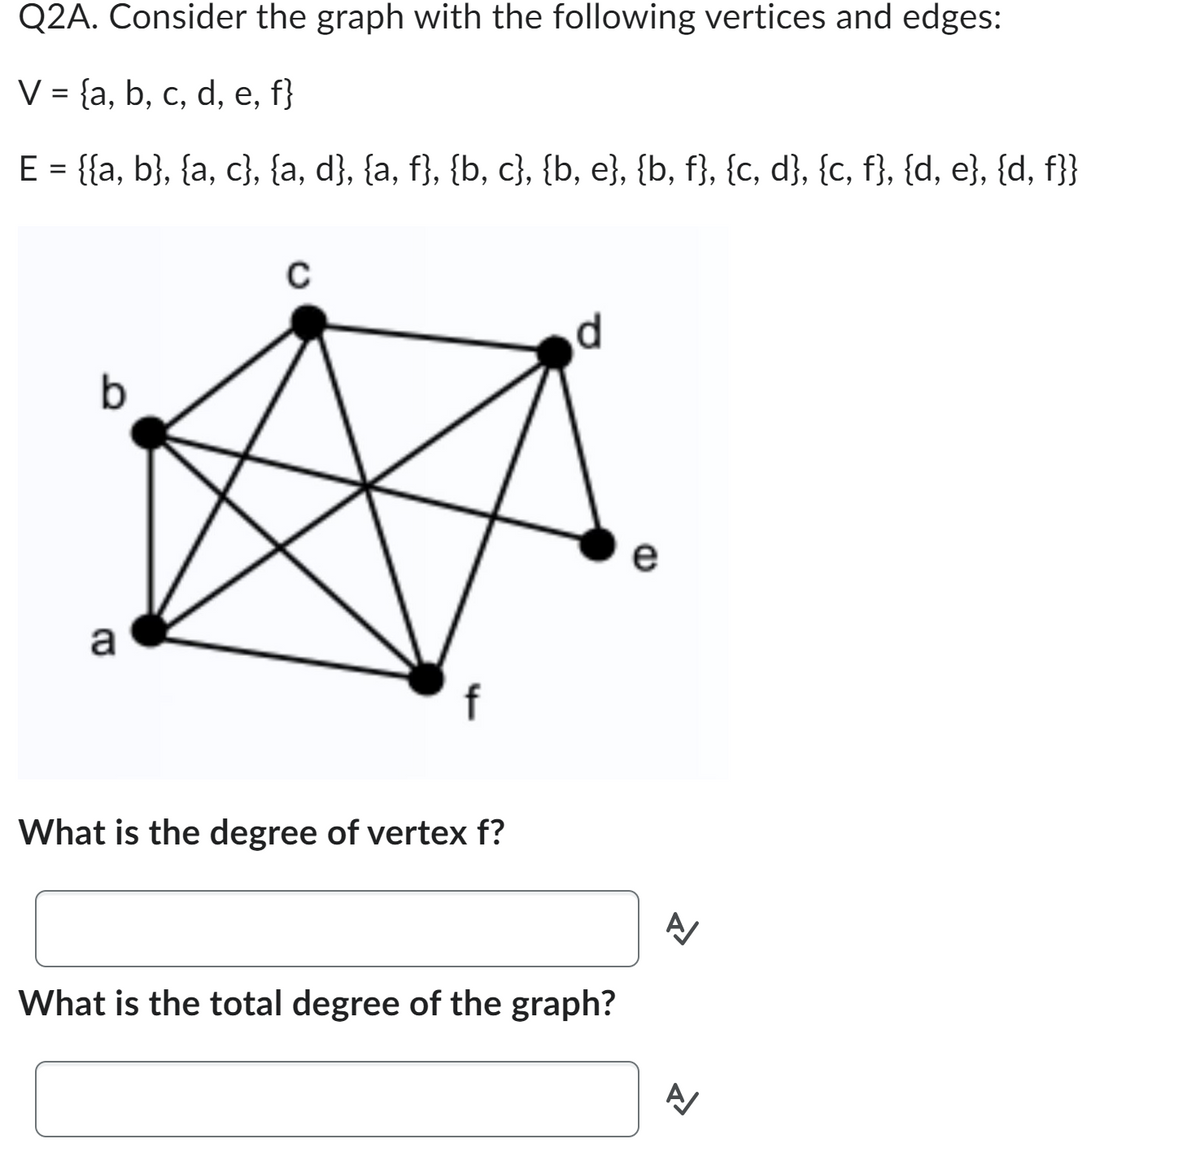 Q2A. Consider the graph with the following vertices and edges:
V = {a, b, c, d, e, f}
E = {{a, b}, {a, c}, {a, d}, {a, f}, {b, c}, {b, e}, {b, f}, {c, d}, {c, f}, {d, e}, {d, f}}
O
a
C
4
What is the degree of vertex f?
d
What is the total degree of the graph?
e
A
A